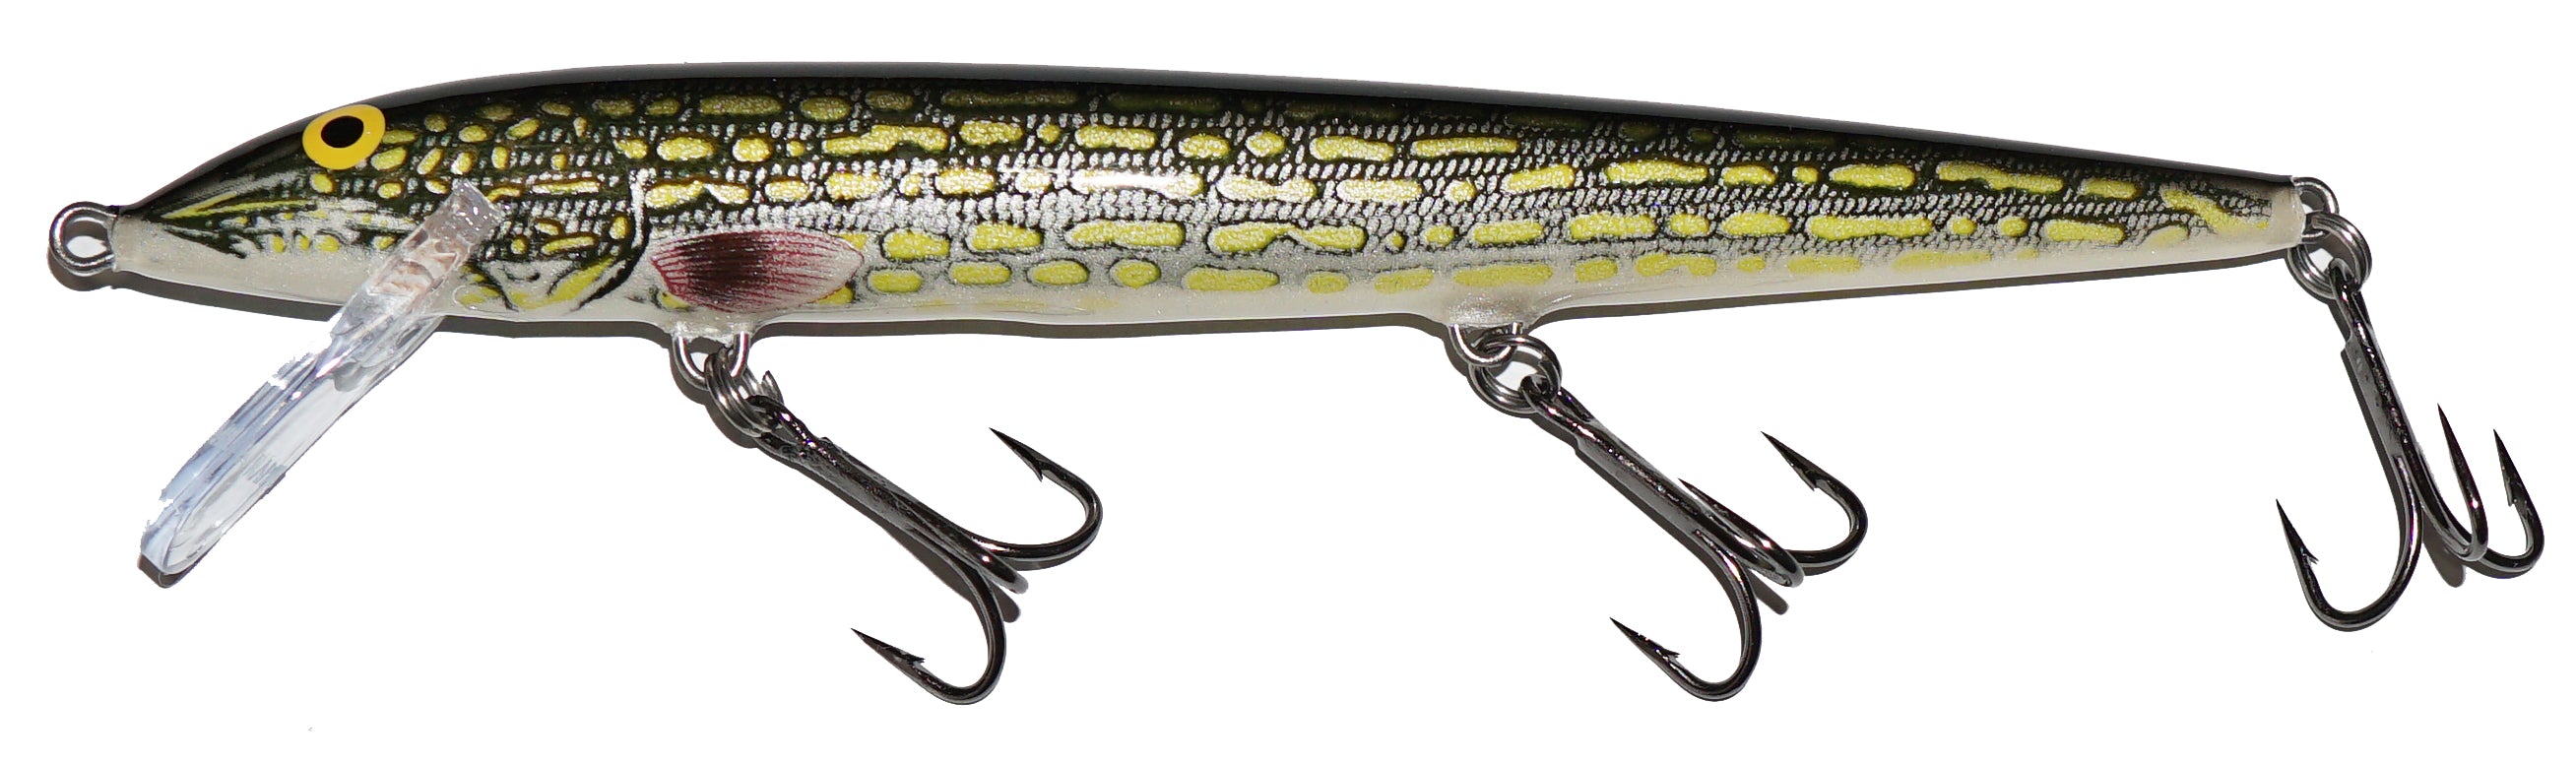 Small Rainbow Trout Crankbait Floating Lure (50mm)